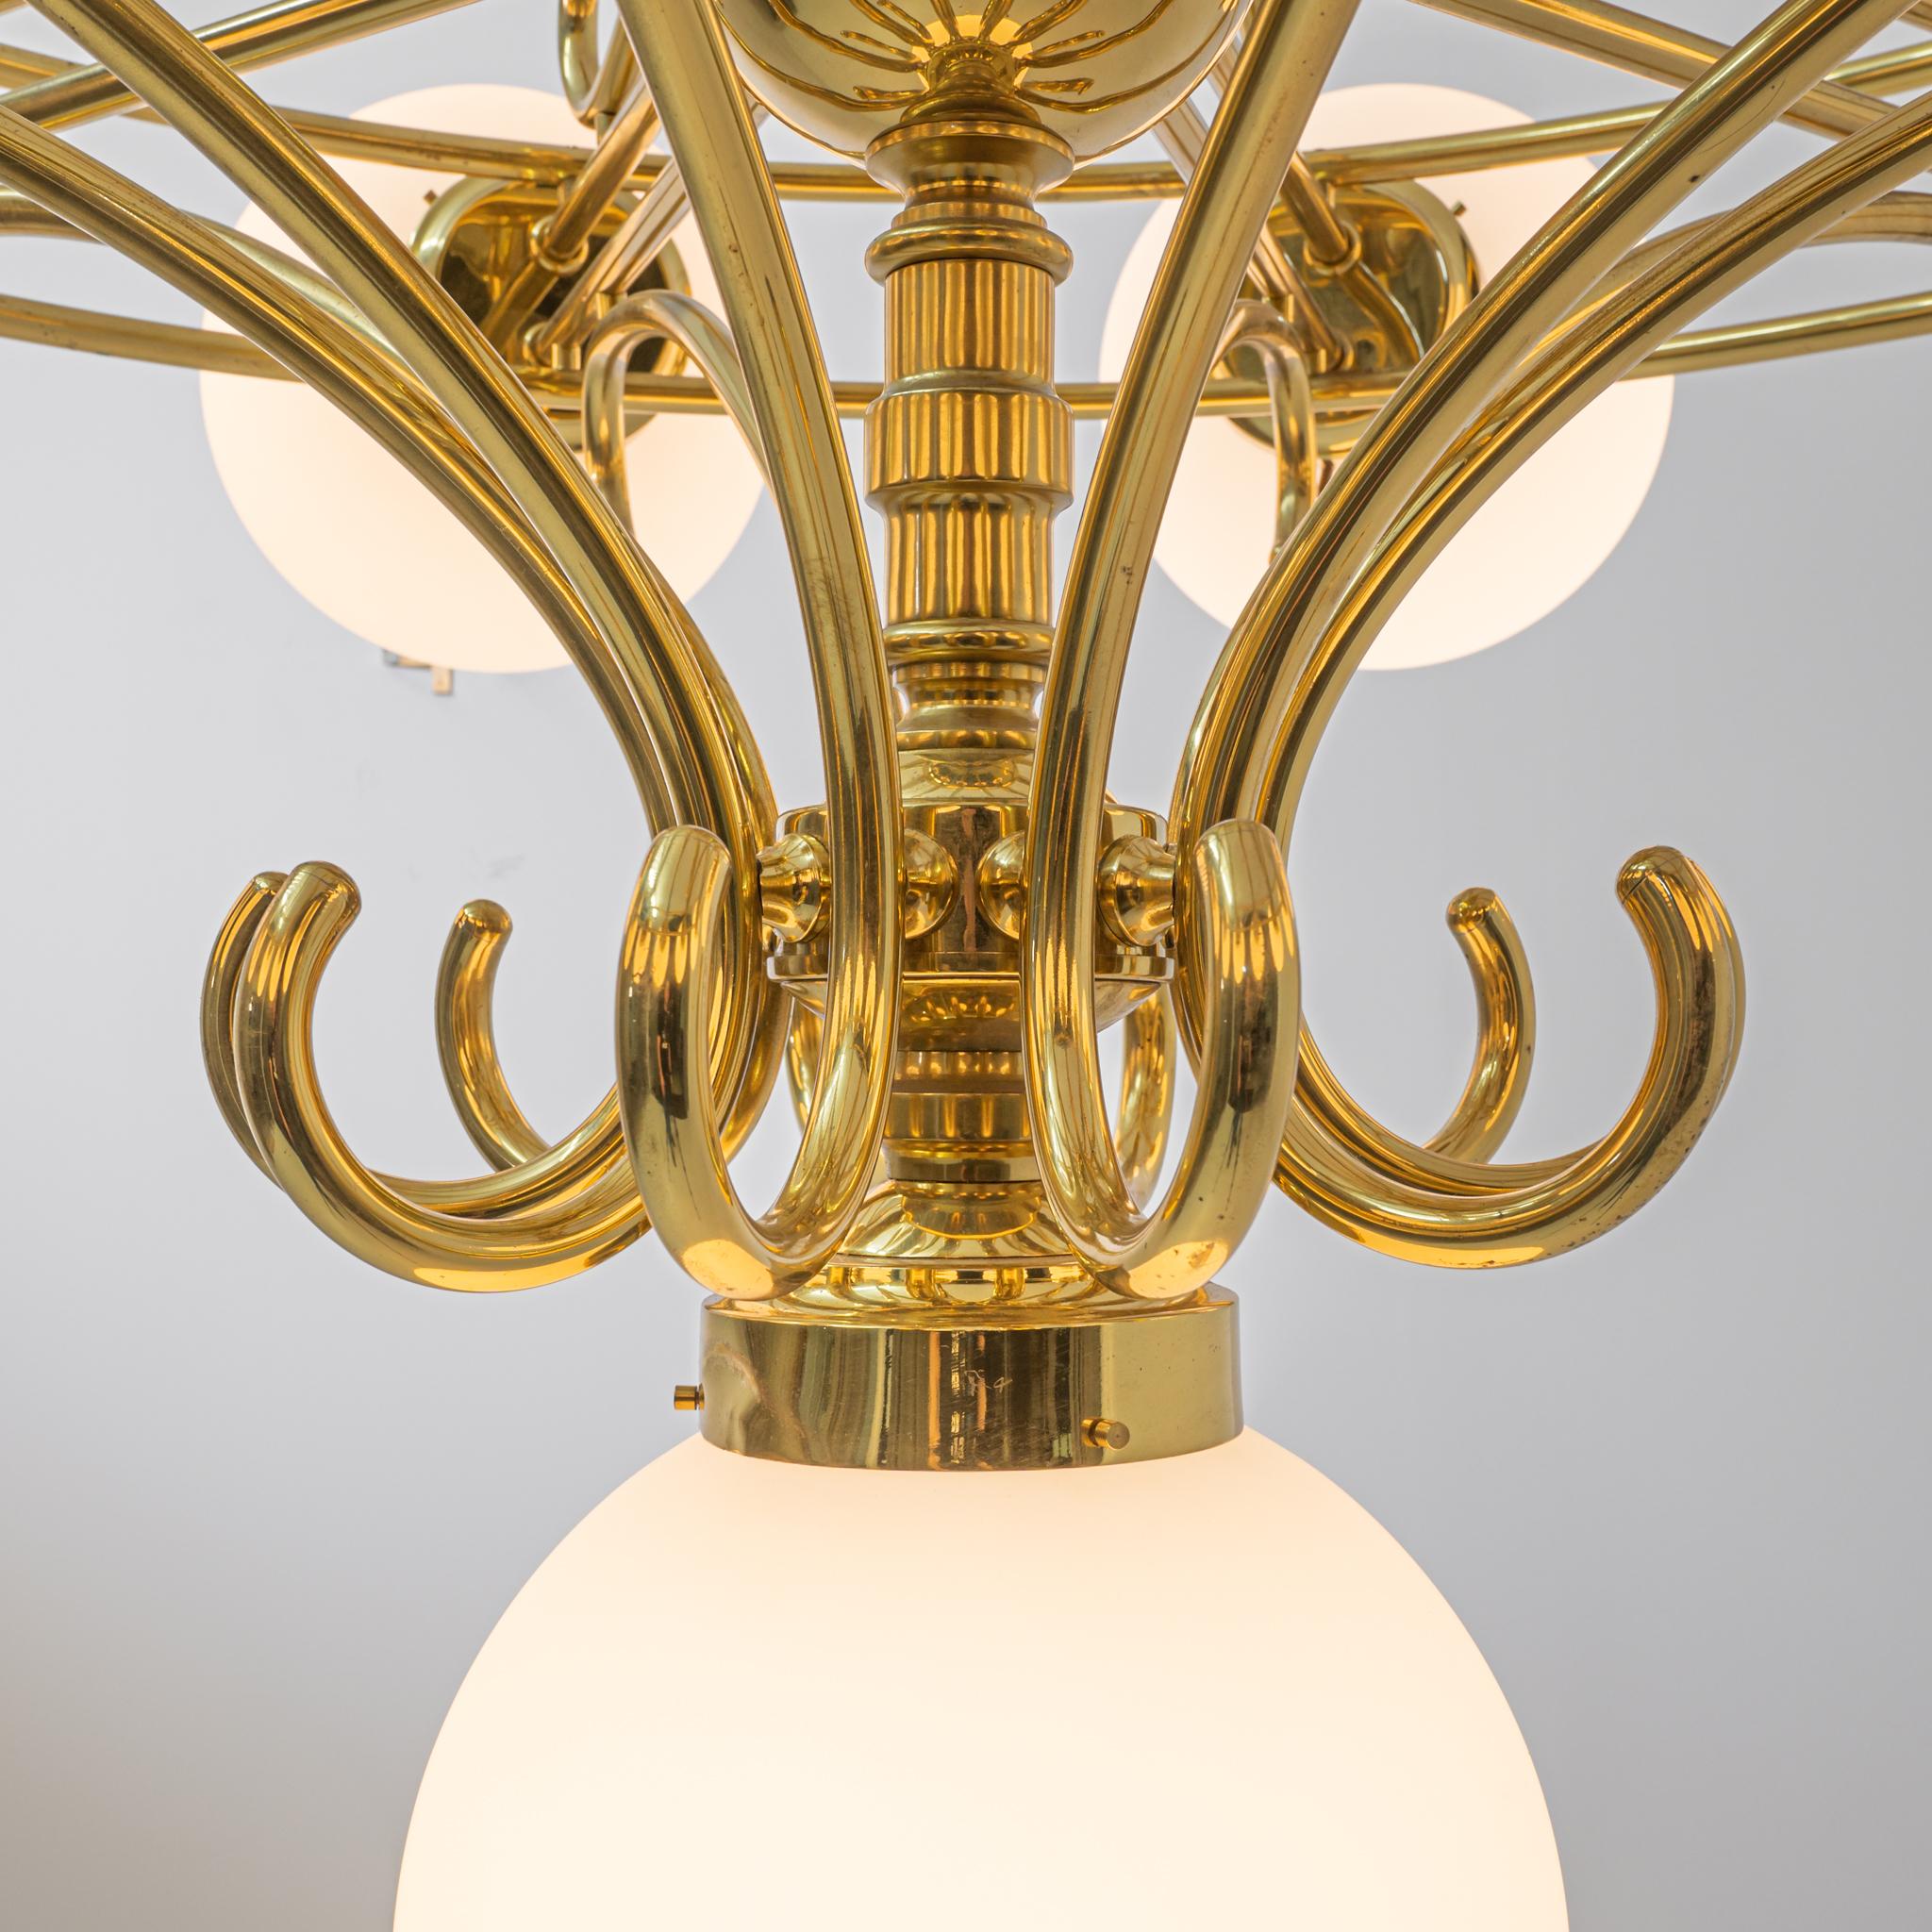 Bright and elegant, this vintage chandelier combines a baroque silhouette with the simplicity of Czech Mid Century design. Made in Czechia in the 20th century, frosted glass orbs form a crown of light around a wheel of brass, criss-crossed with